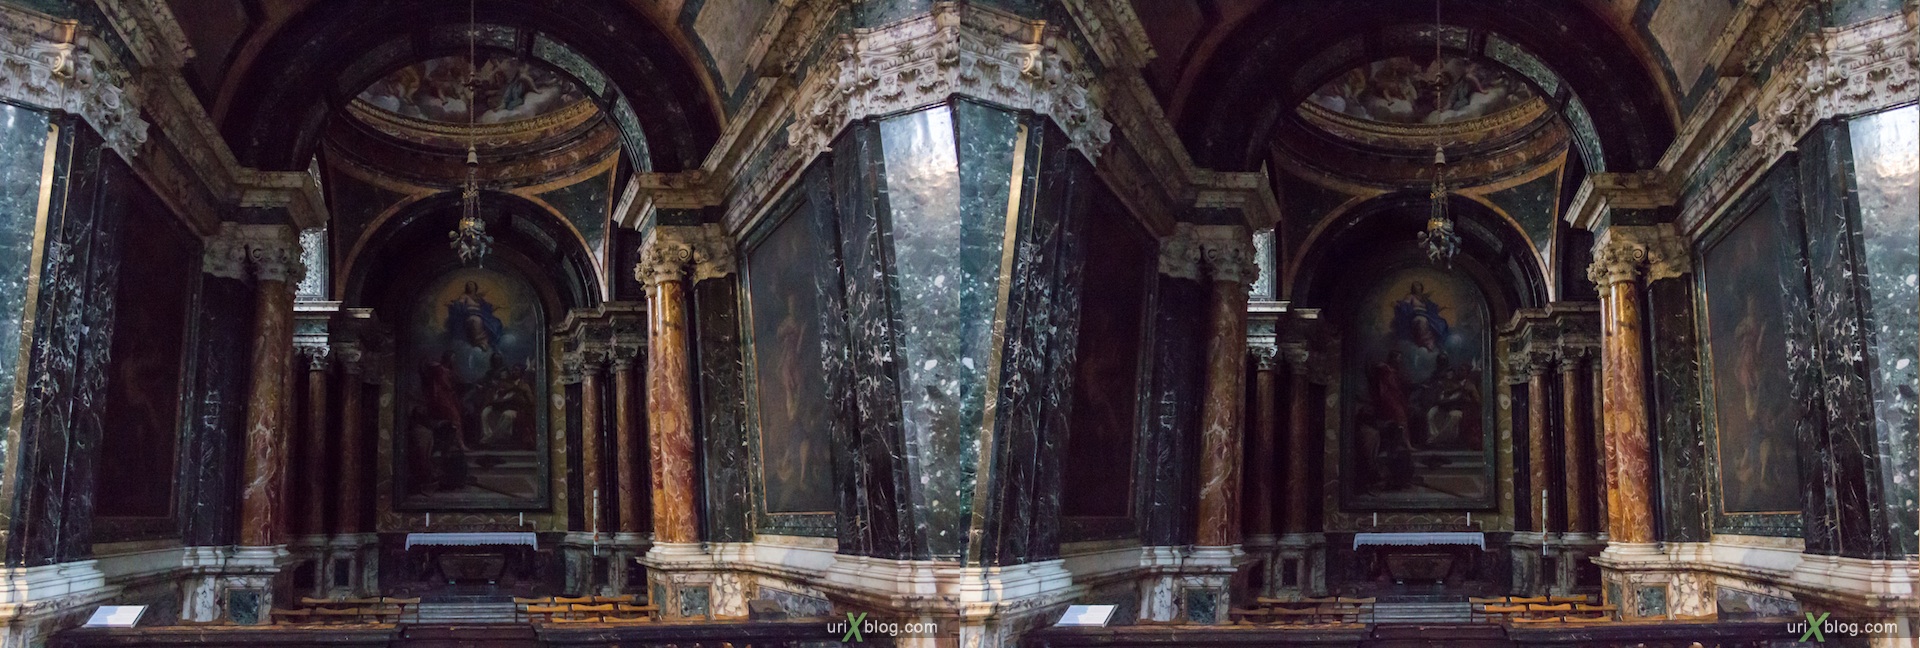 2012, church, basilica di Santa Maria del Popolo, Rome, Italy, cathedral, monastery, Christianity, Catholicism, 3D, stereo pair, cross-eyed, crossview, cross view stereo pair